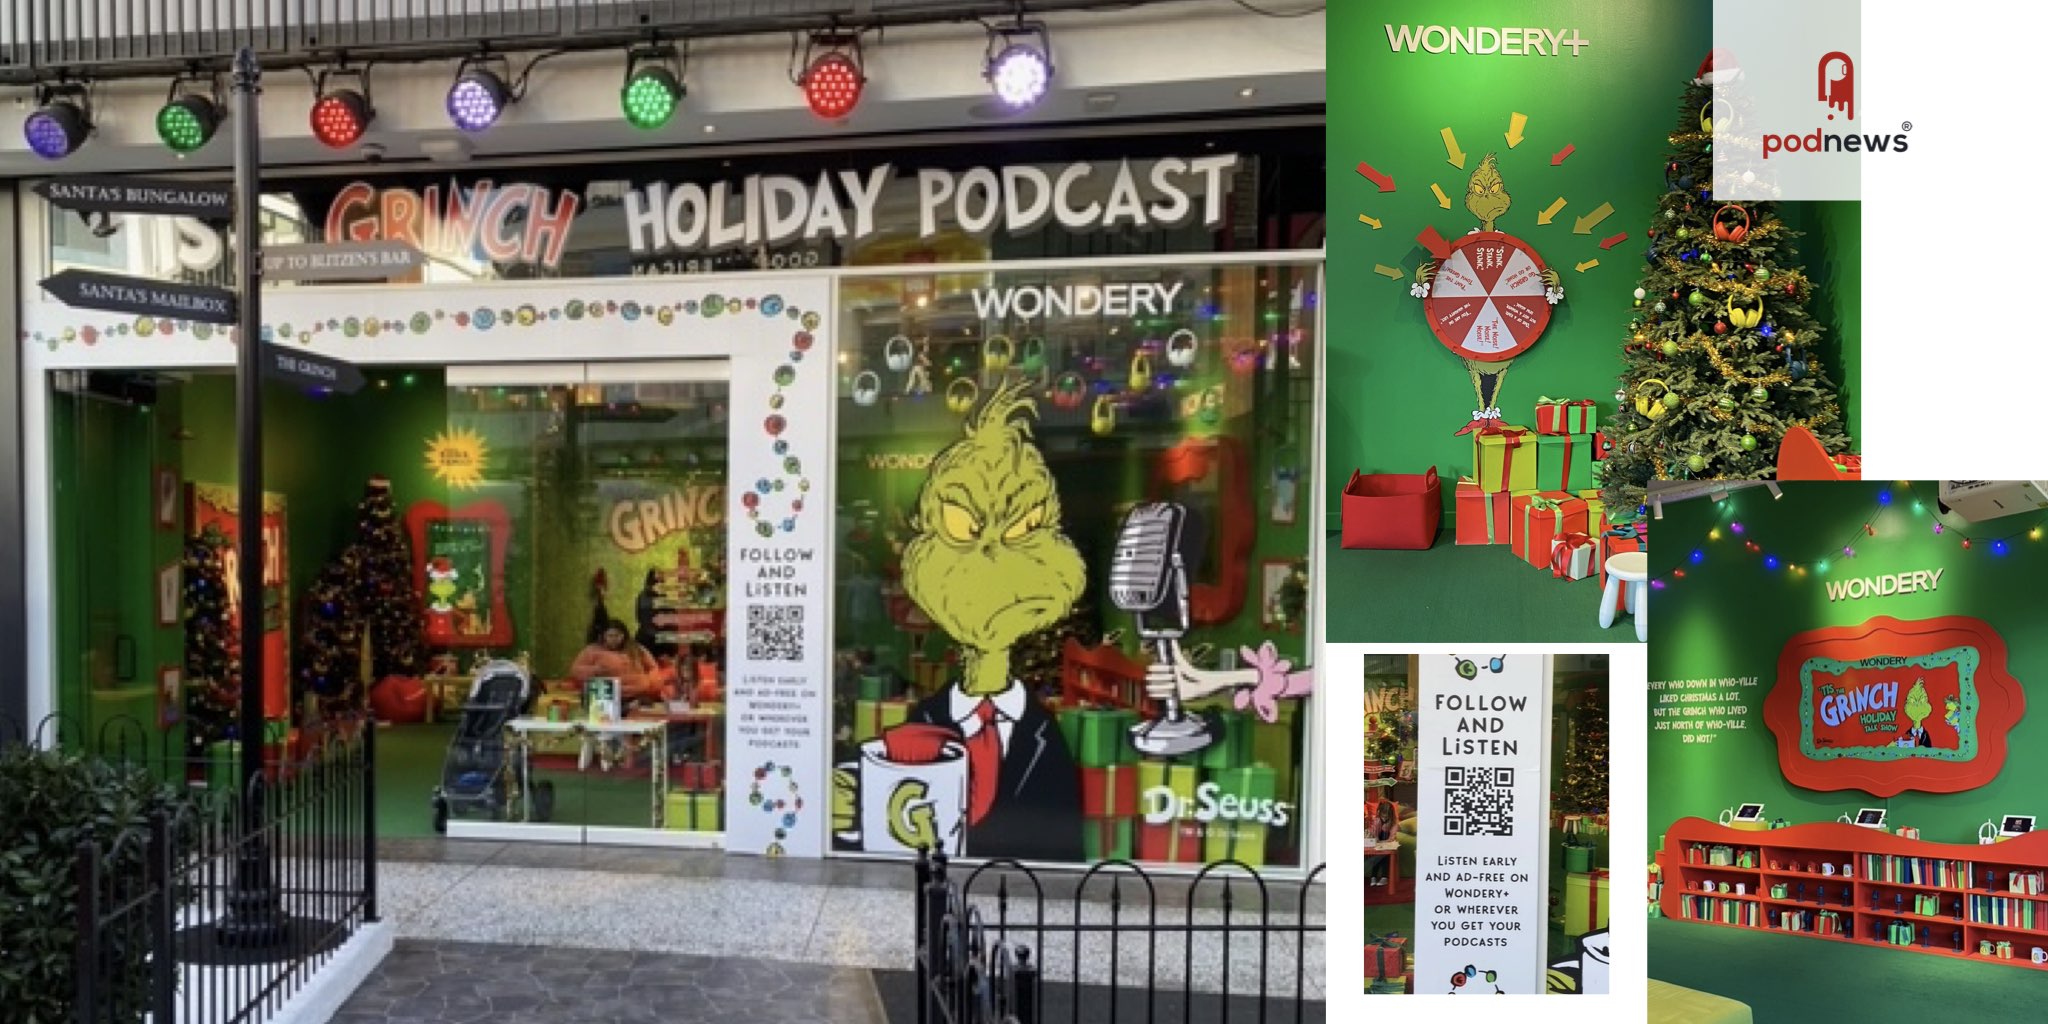 Grinch podcast